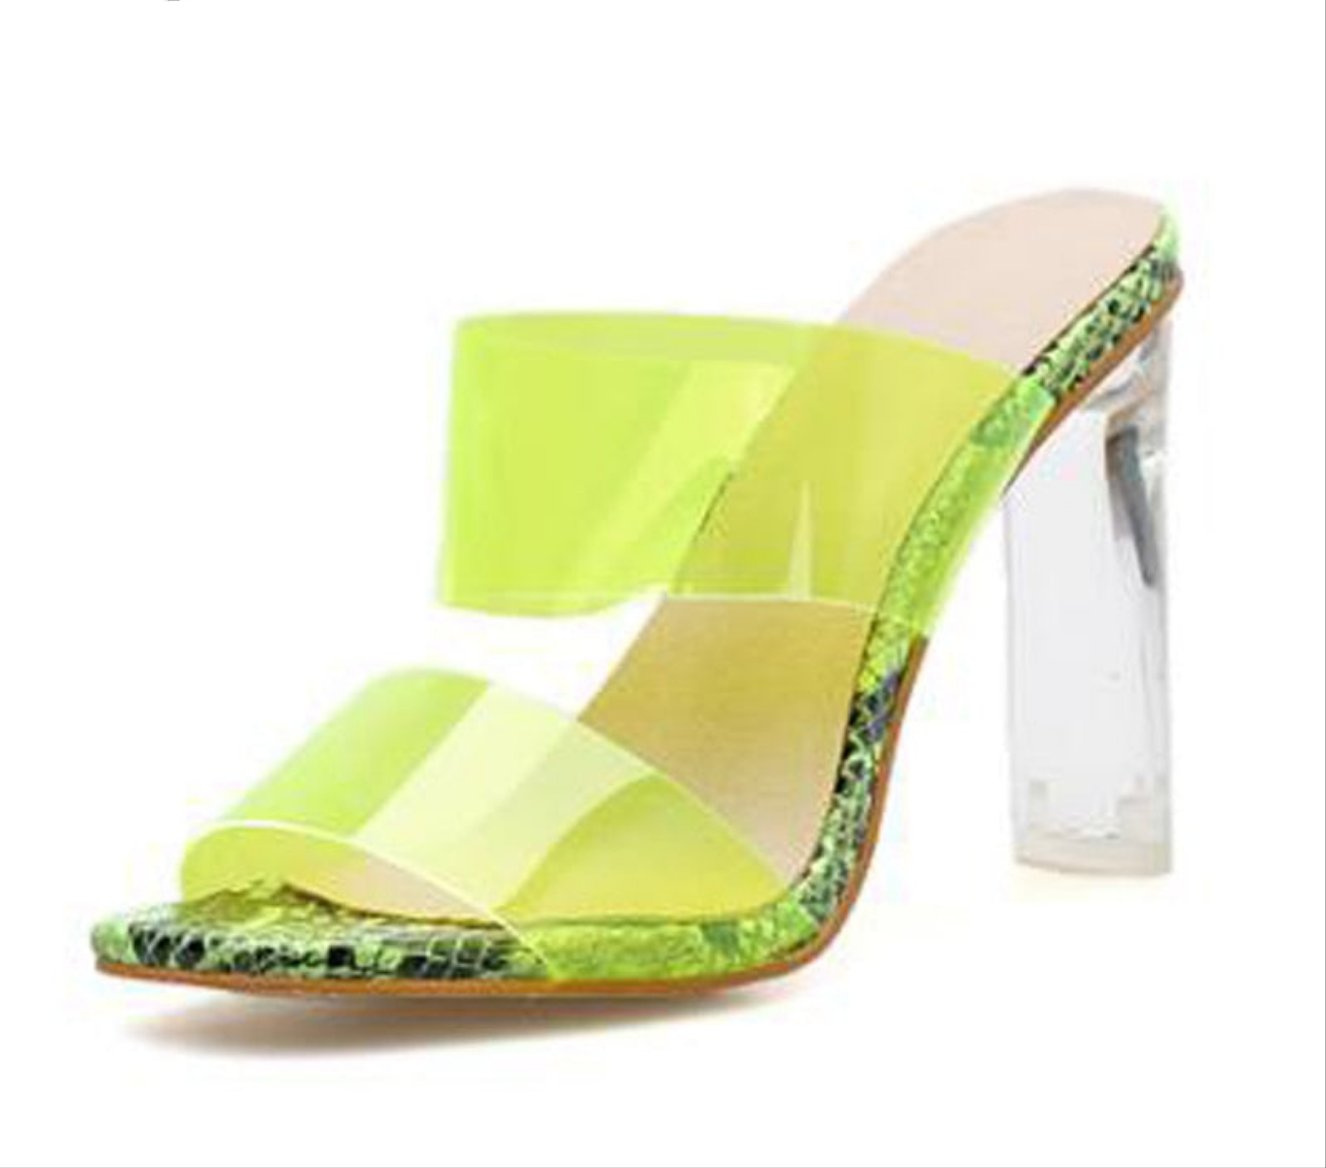 PVC Transparent Slippers Open Toes Sexy Serpentine High Heel Crystal Women Shoes Transparent High Heels 11cm Slippers